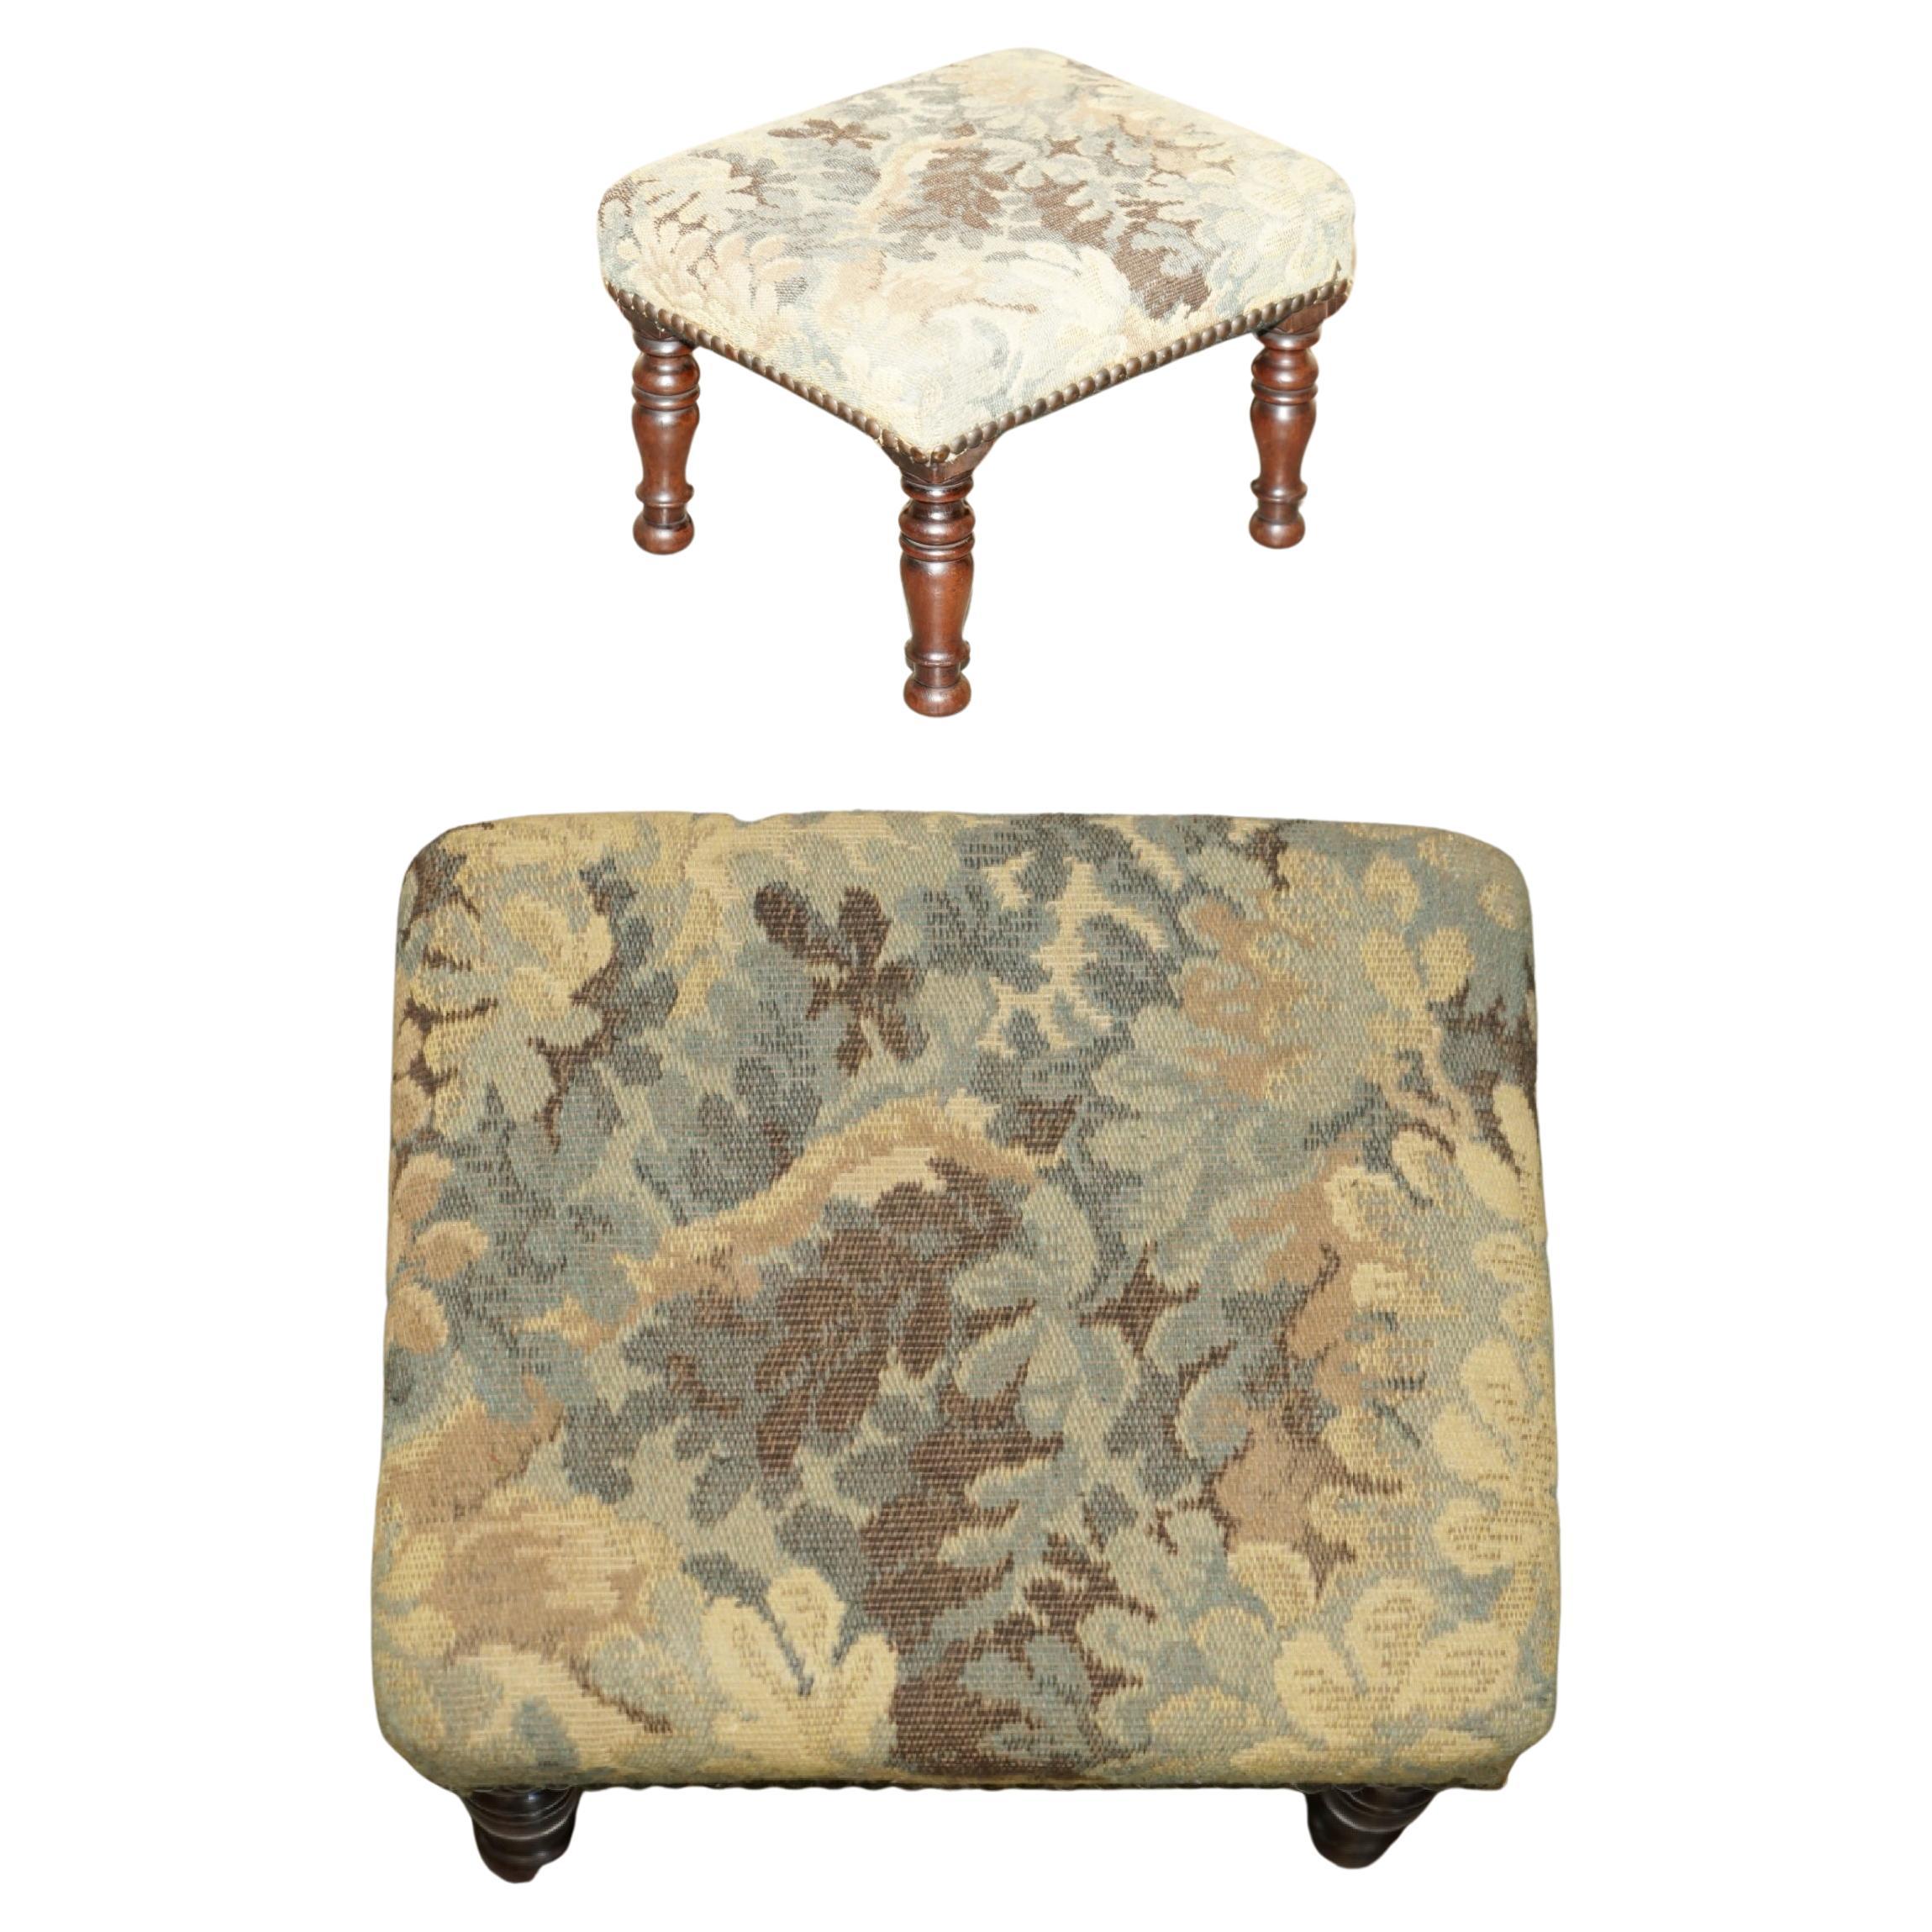 https://a.1stdibscdn.com/small-antique-georgian-style-english-country-house-footstool-embroidered-top-for-sale/f_28233/f_358502221692954502529/f_35850222_1692954503452_bg_processed.jpg